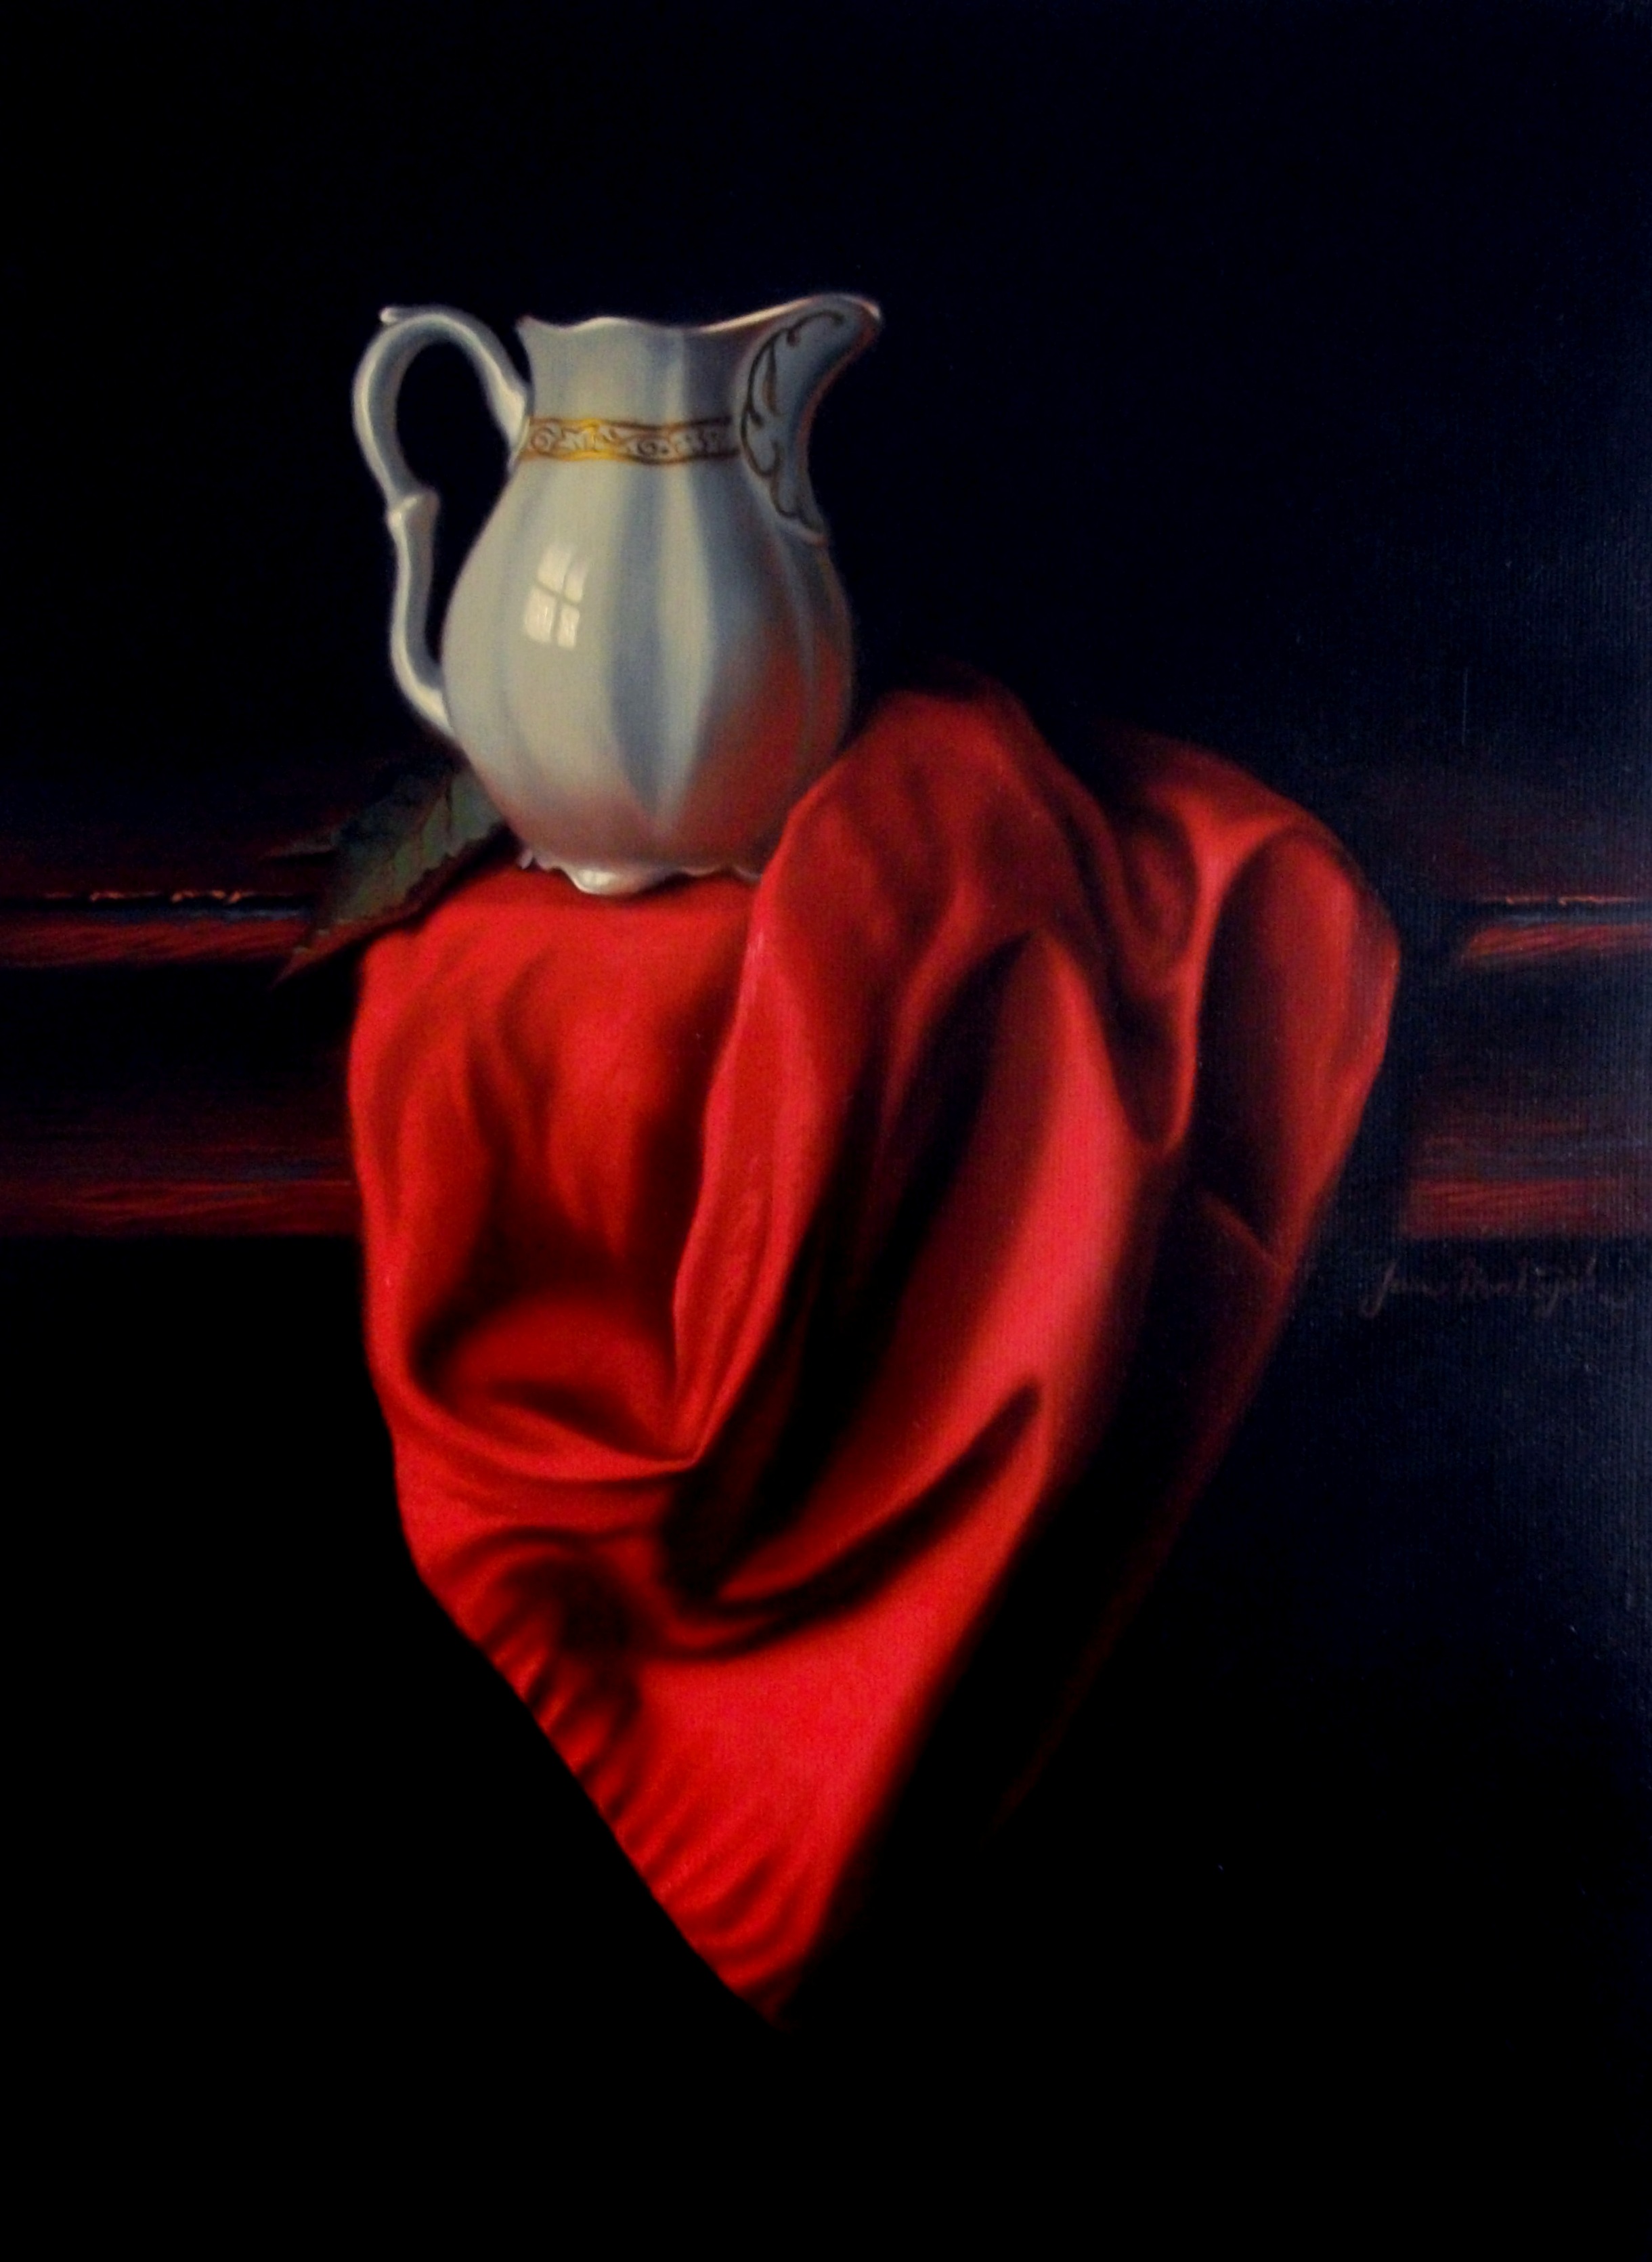 Still life with a red tablecloth - 30 x 40 cm